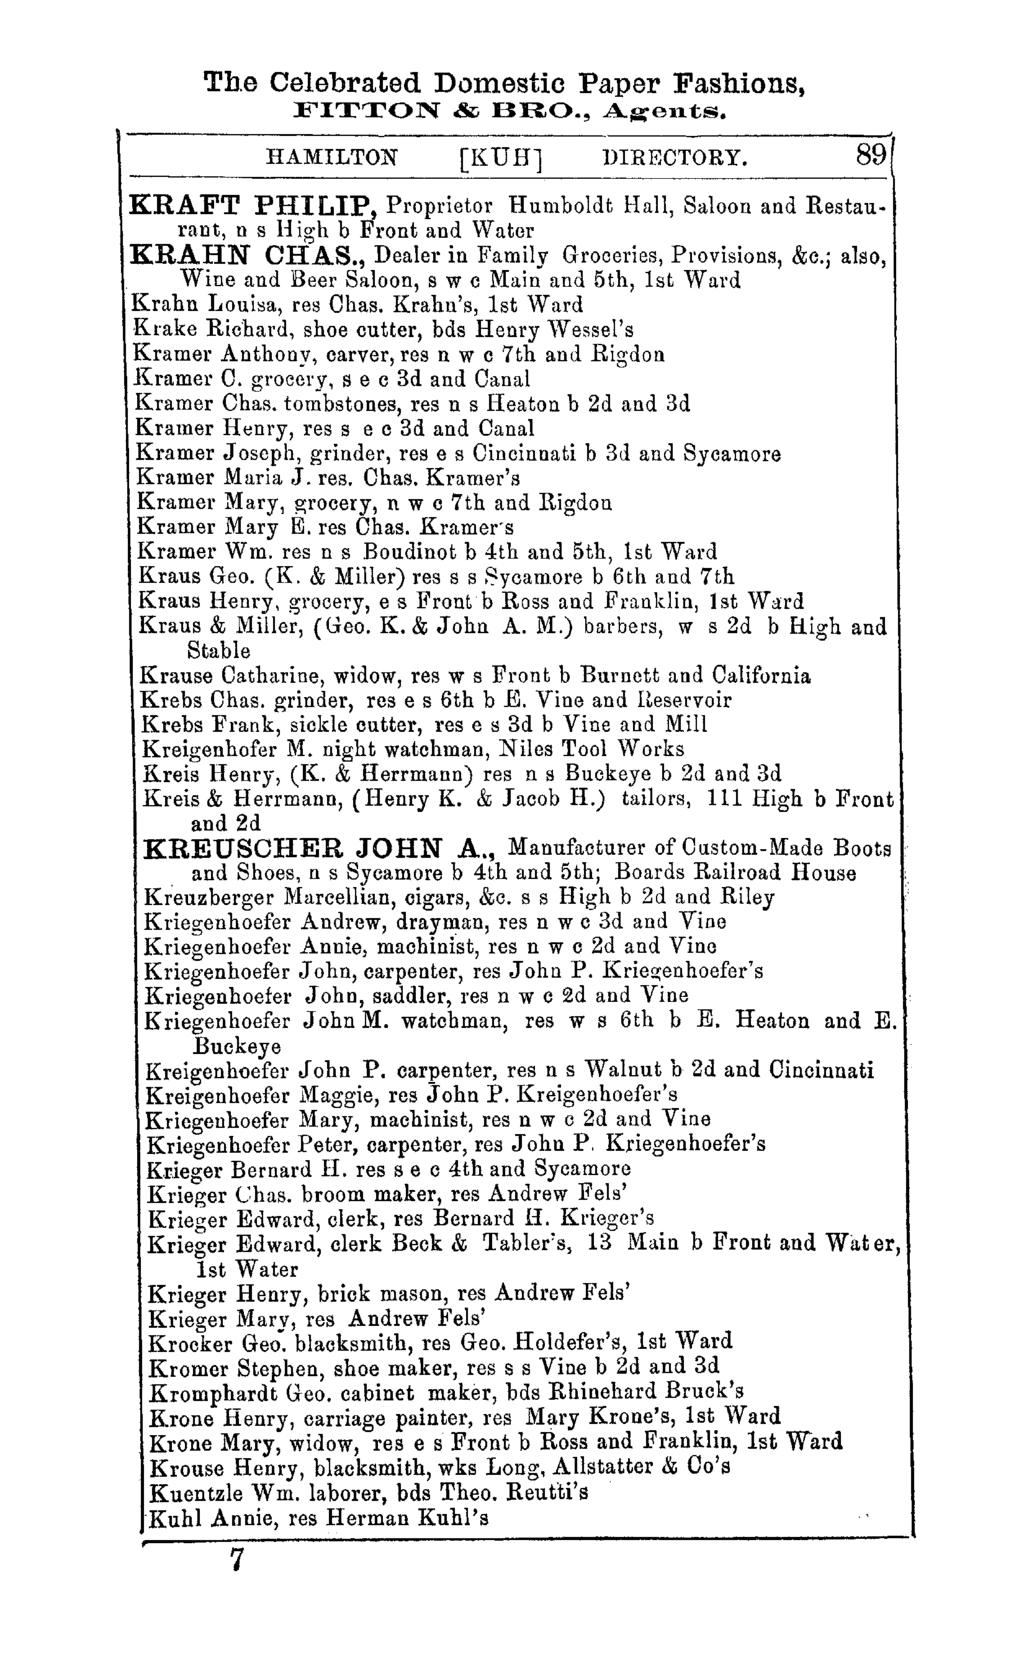 The Celebrated Domestic Paper Fashions, FITTON & BRO., A~ellts. HAMILTON [KDR1 DIREOTORY. 89 KRAFT PHI LIP, Proprietor Humboldt Hall, Saloon and Restaurant, n s High b Front and Water KRAHN CHAS.